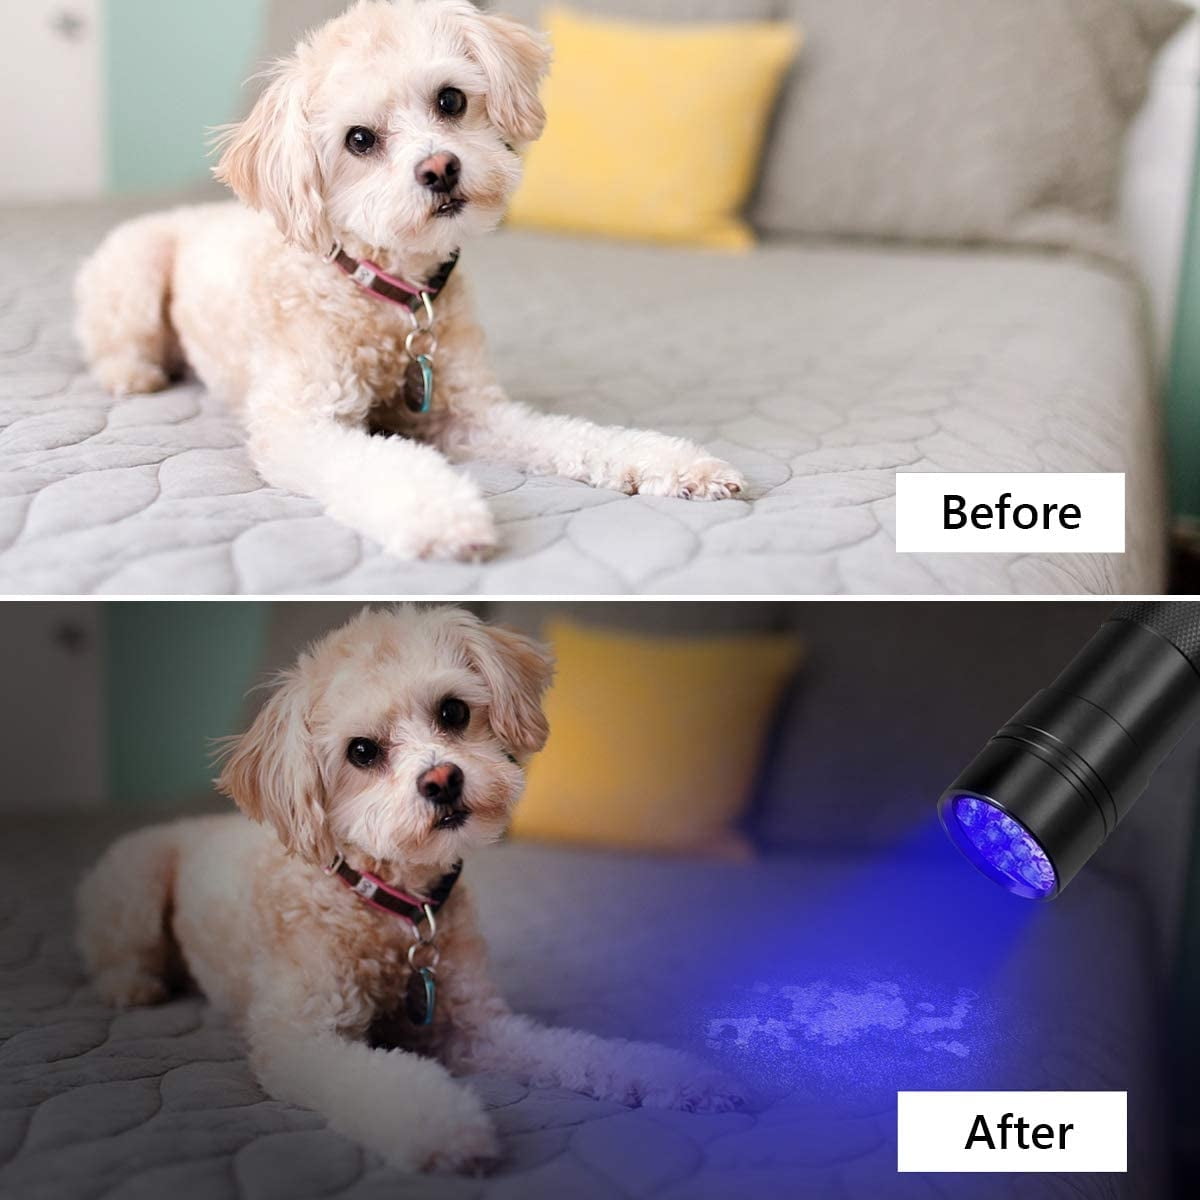  ULTRAFIRE UV Flashlight for Resin Curing, 395nm LED UV Curing  Light, Zoomable Blacklight Flashlight for Pet Urine, Cat Dog Stains, Bed  Bug, Household Wardrobe Toilet WF-508UV : Pet Supplies